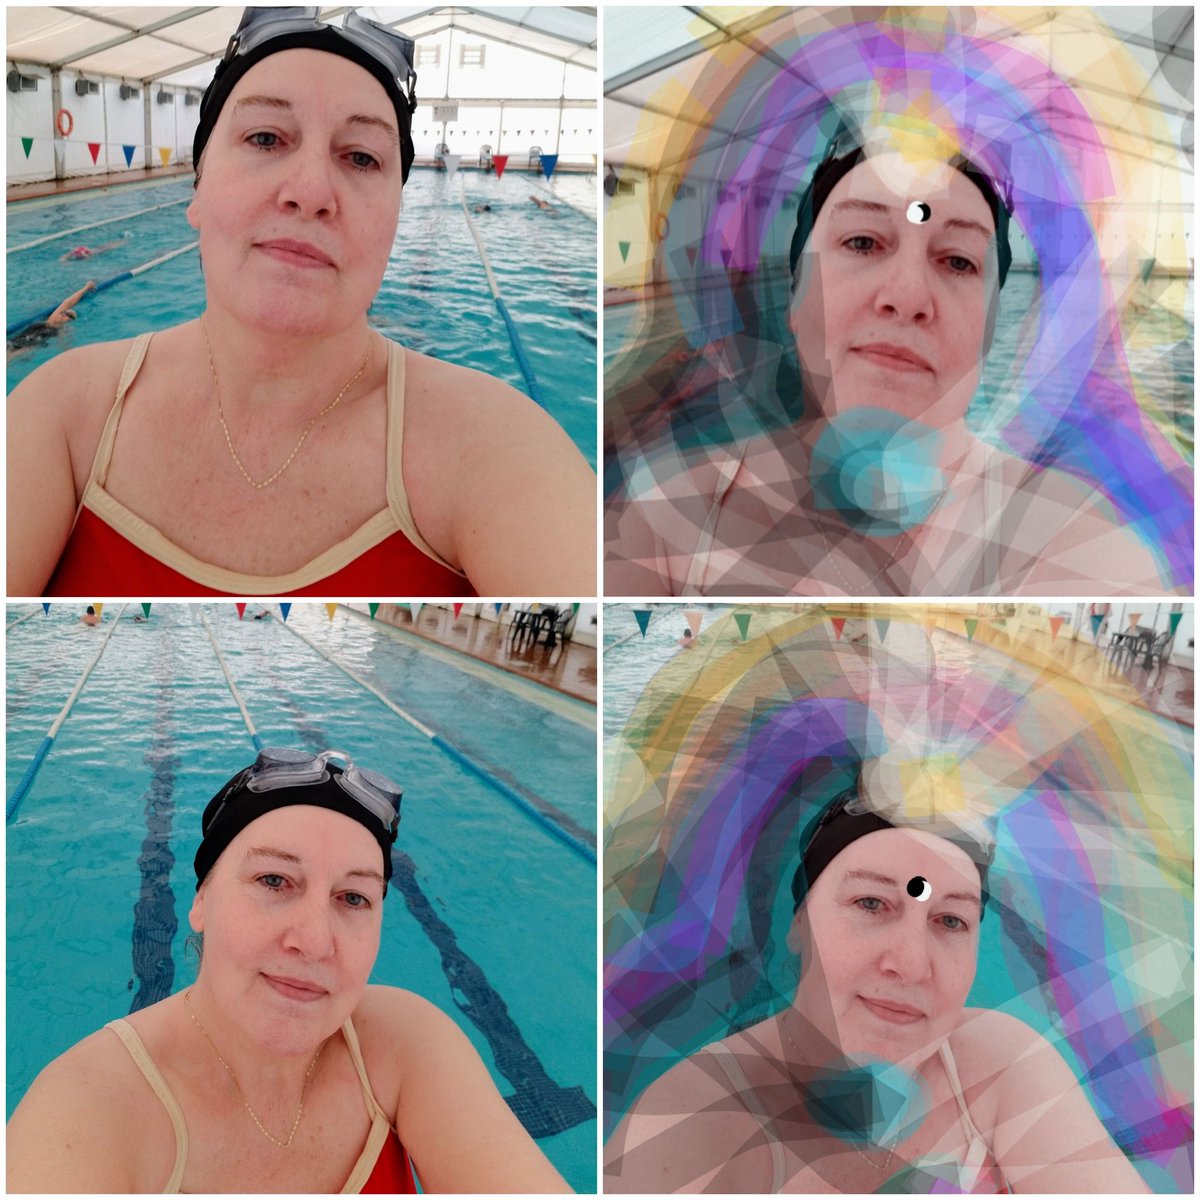 #Exercise wherever we are.
#Swimming best #sport 4 #body,
#mind & #soul, no matter the age.
#Water. #WaterTherapy. #AquaticYoga.

Sequences: with & without #Aura,
#chakras #Painted. #DigitalArt.
#Auraism © #XSolé
#Art of The #Light

#Piscina d. #Torredembarra